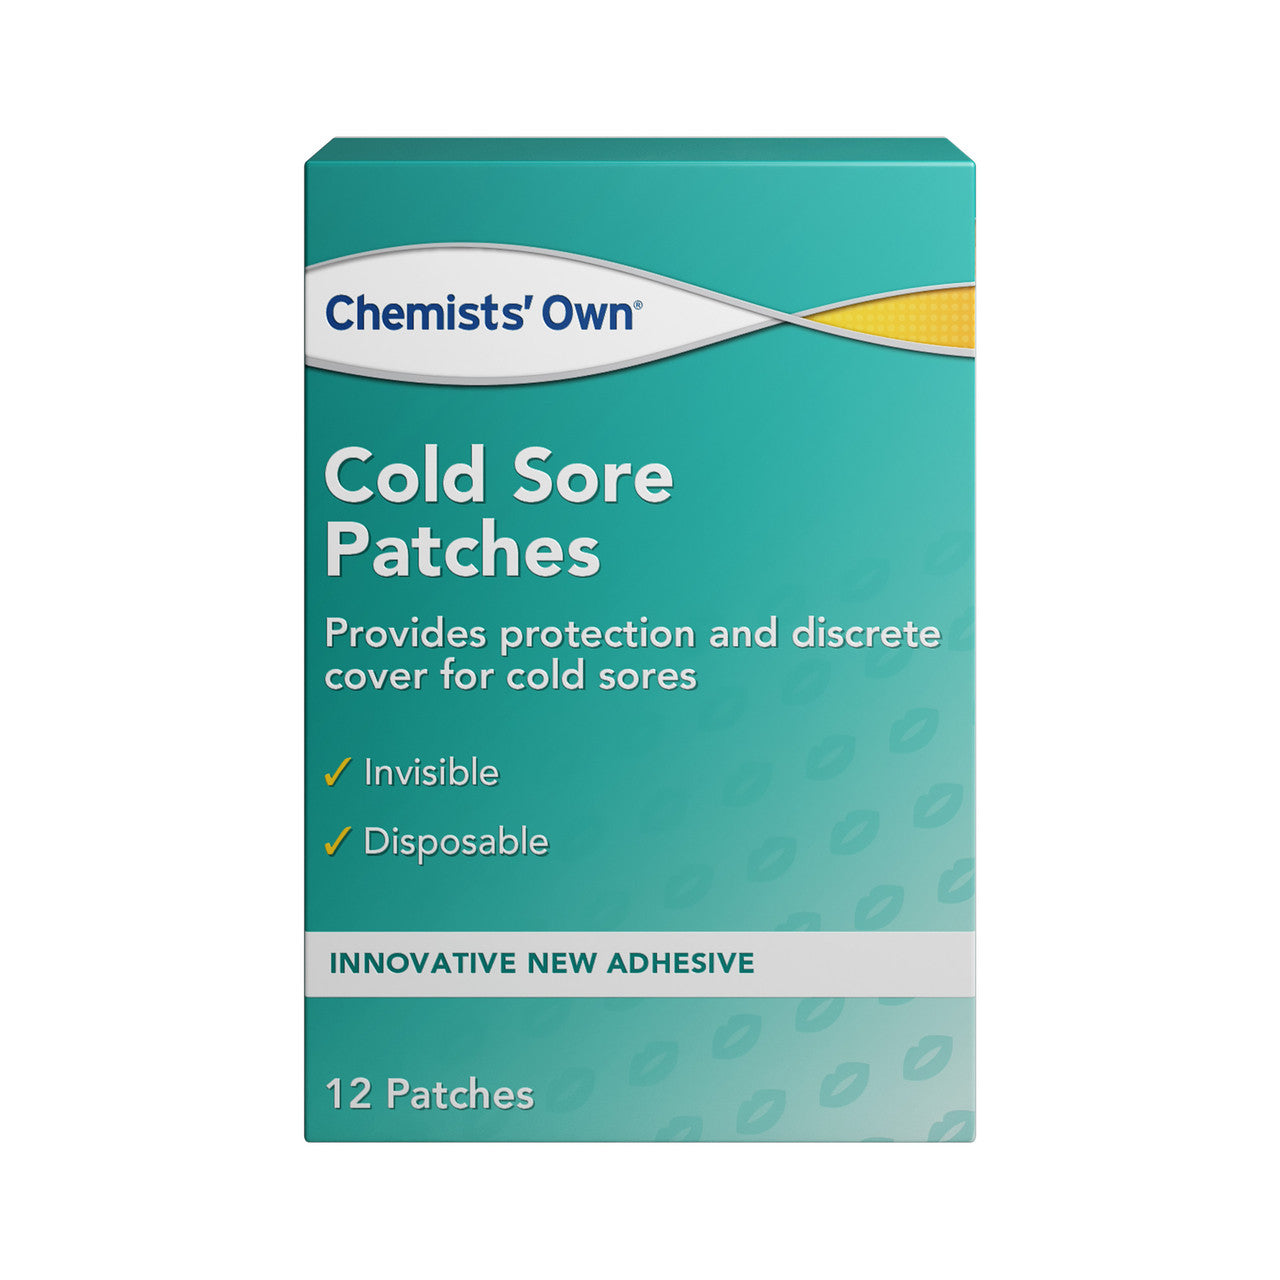 Chemists’ Own® Cold Sore Patches 12 patches